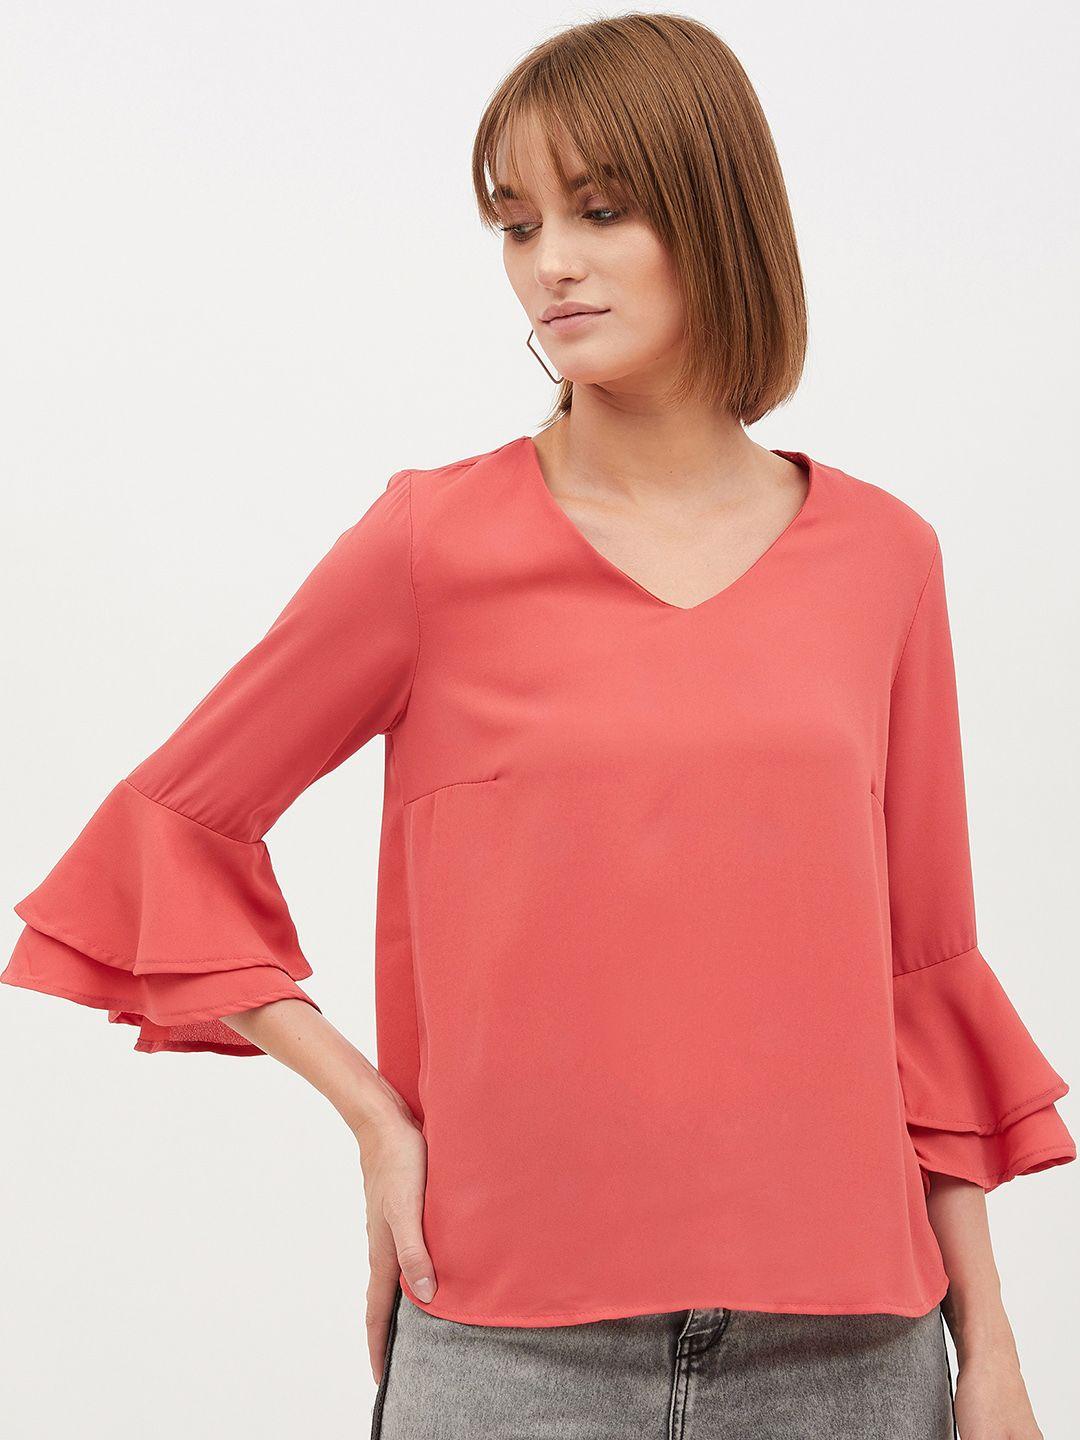 harpa-women-peach-coloured-solid-top